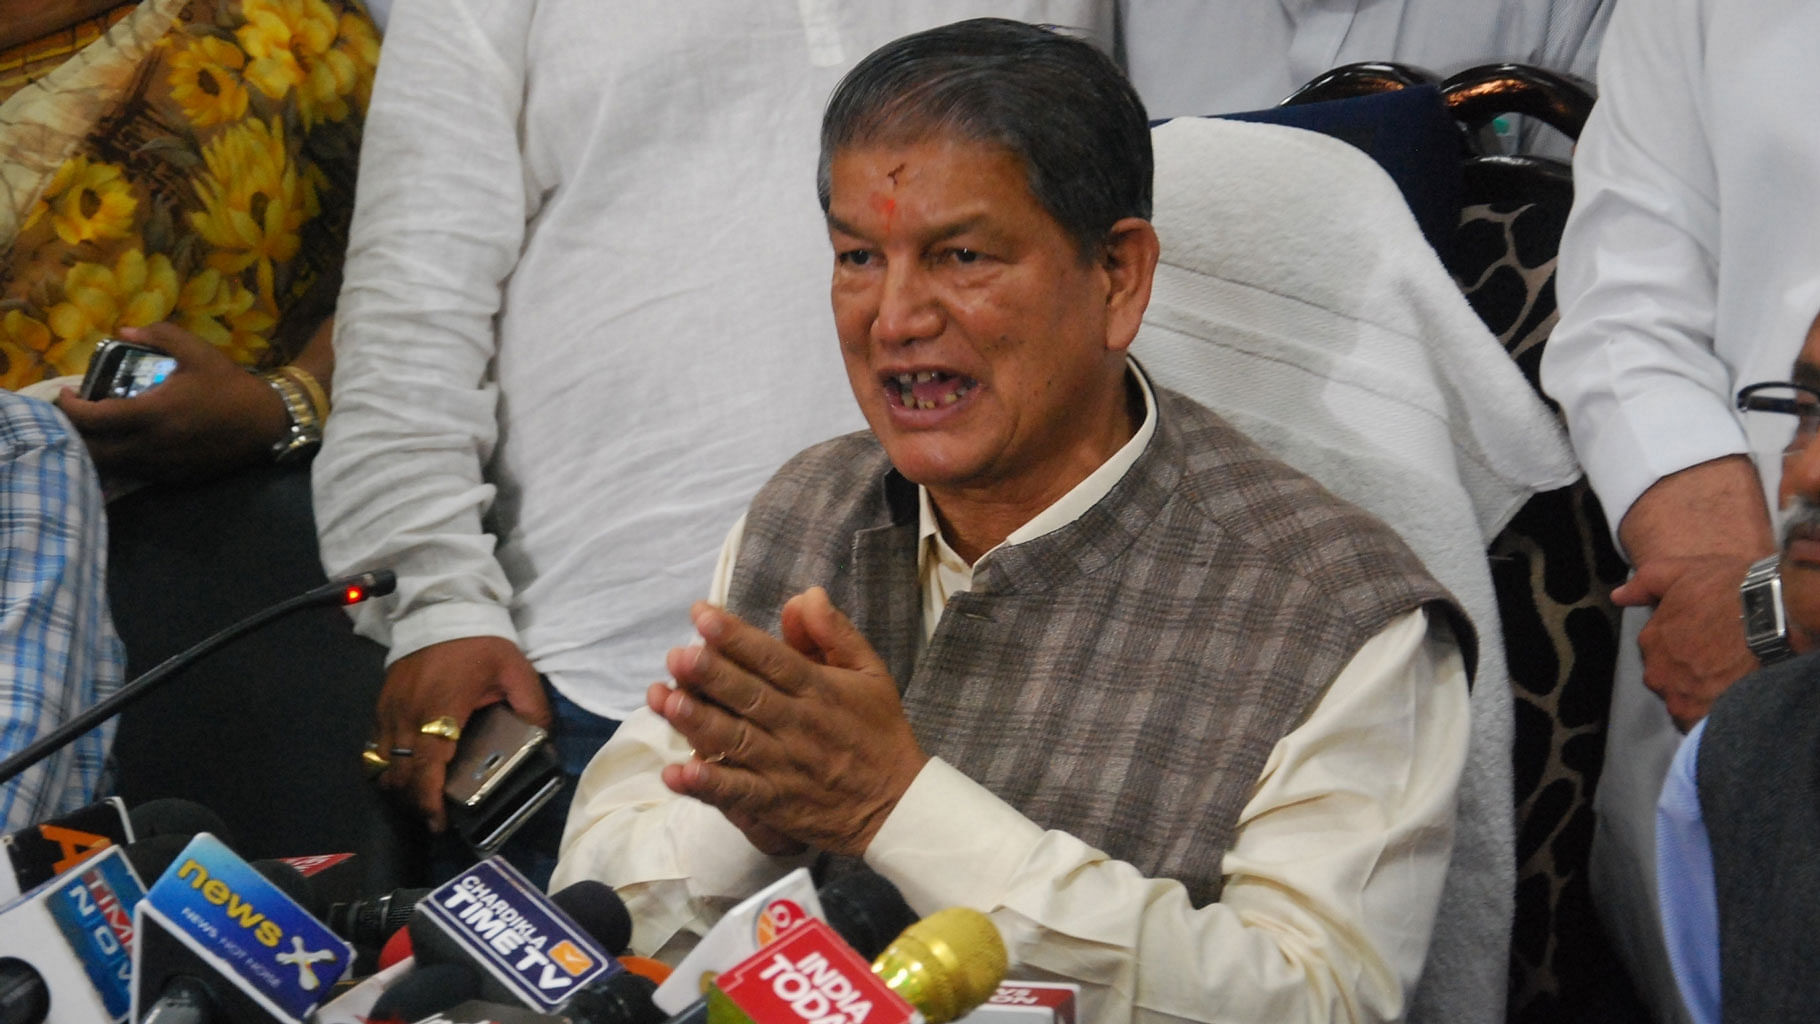 Reinstated Uttarakhand Chief Minister Harish Rawat has appealed to the Centre to cooperate and look ahead for the sake of the state’s future. (File photo: IANS)